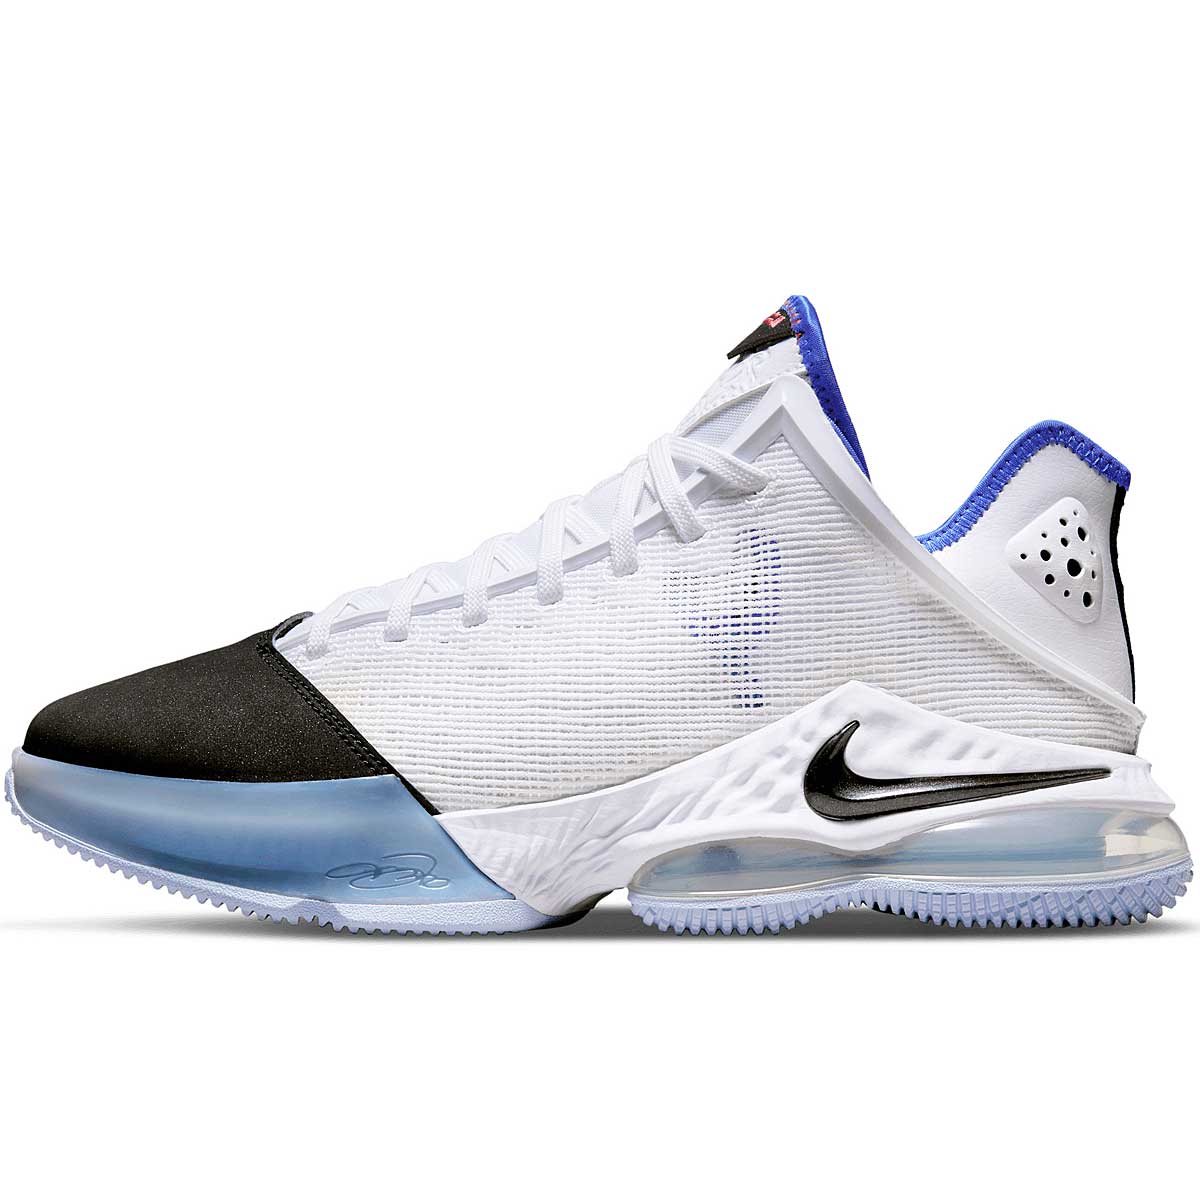 RvceShops - 602 - nike lebron 19 siren red laser blue dc9340 600 release  date - LV x Nike Nike Air Force 1 sneakers White Black Metallic Silver  BS8805